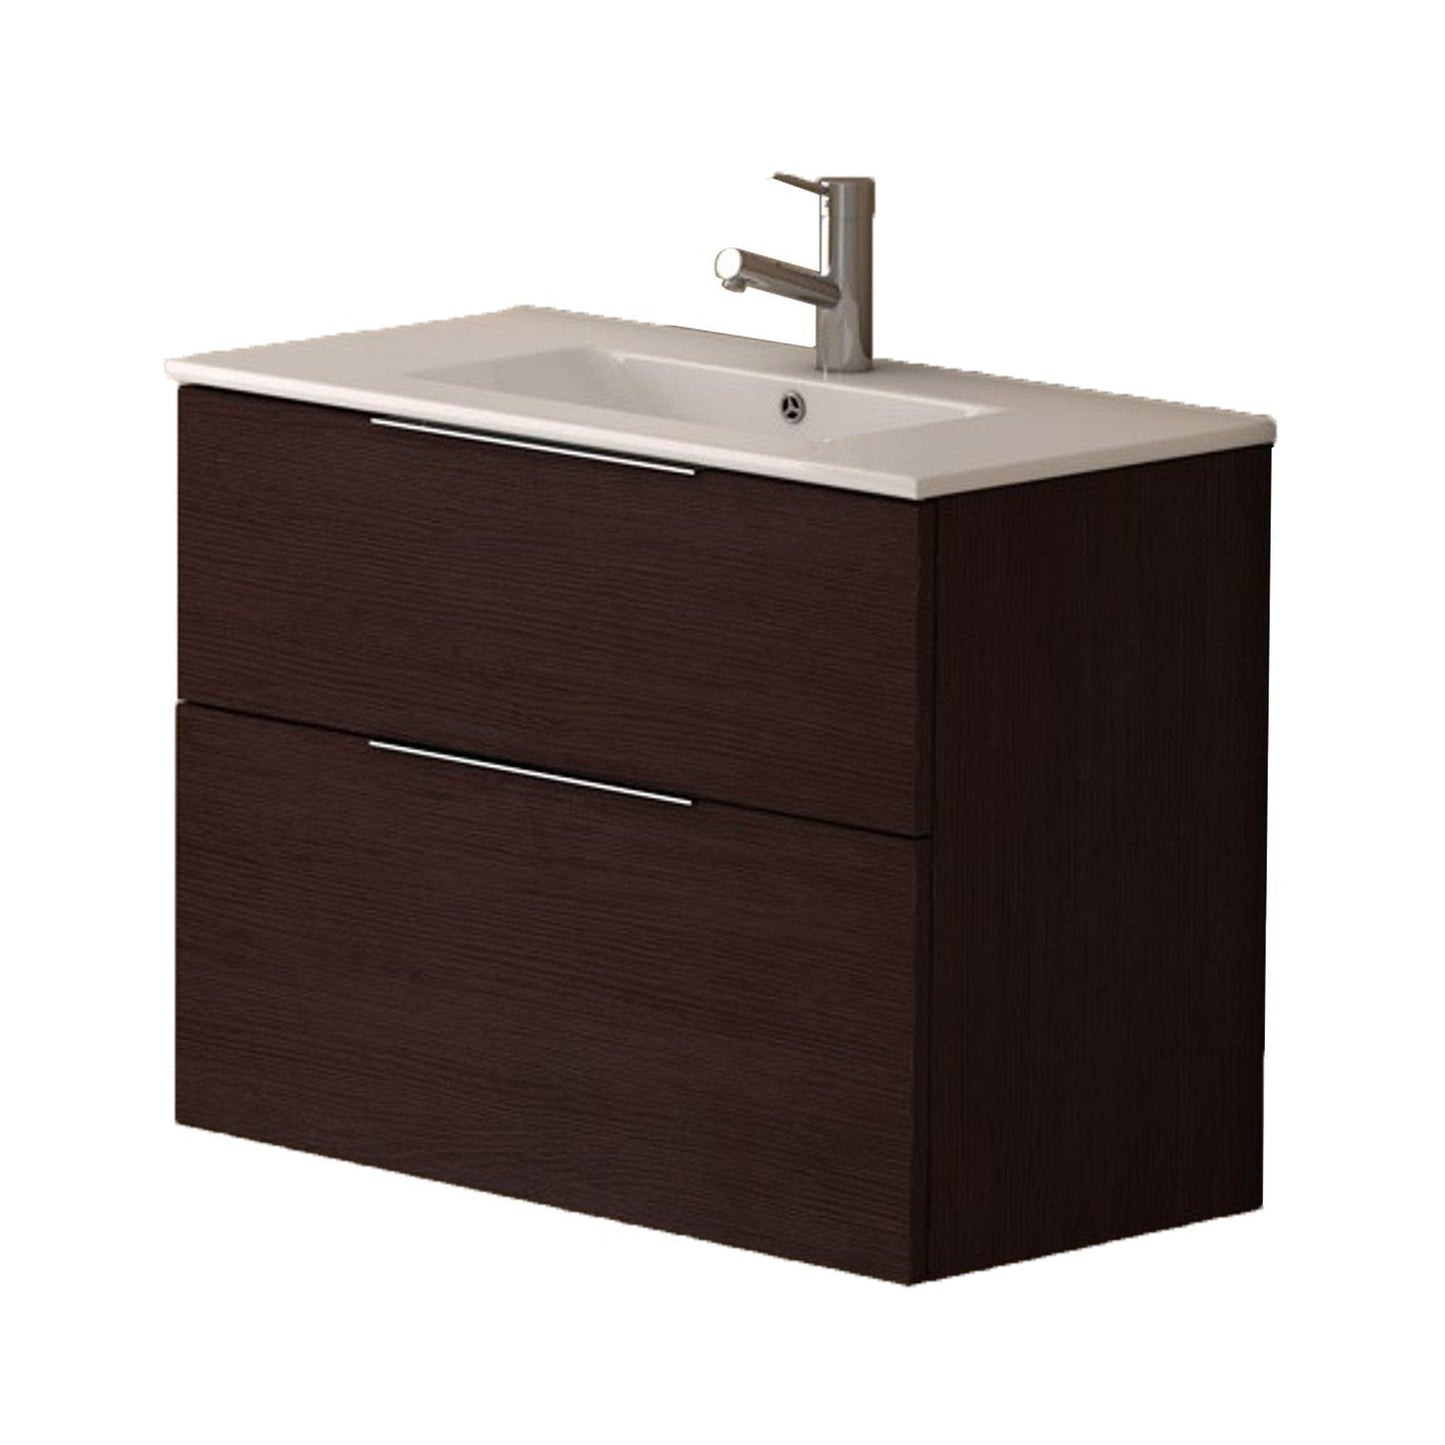 Eviva Galsaky 24” x 24” Wenge Wall-Mounted Bathroom Vanity With White Integrated Porcelain Sink